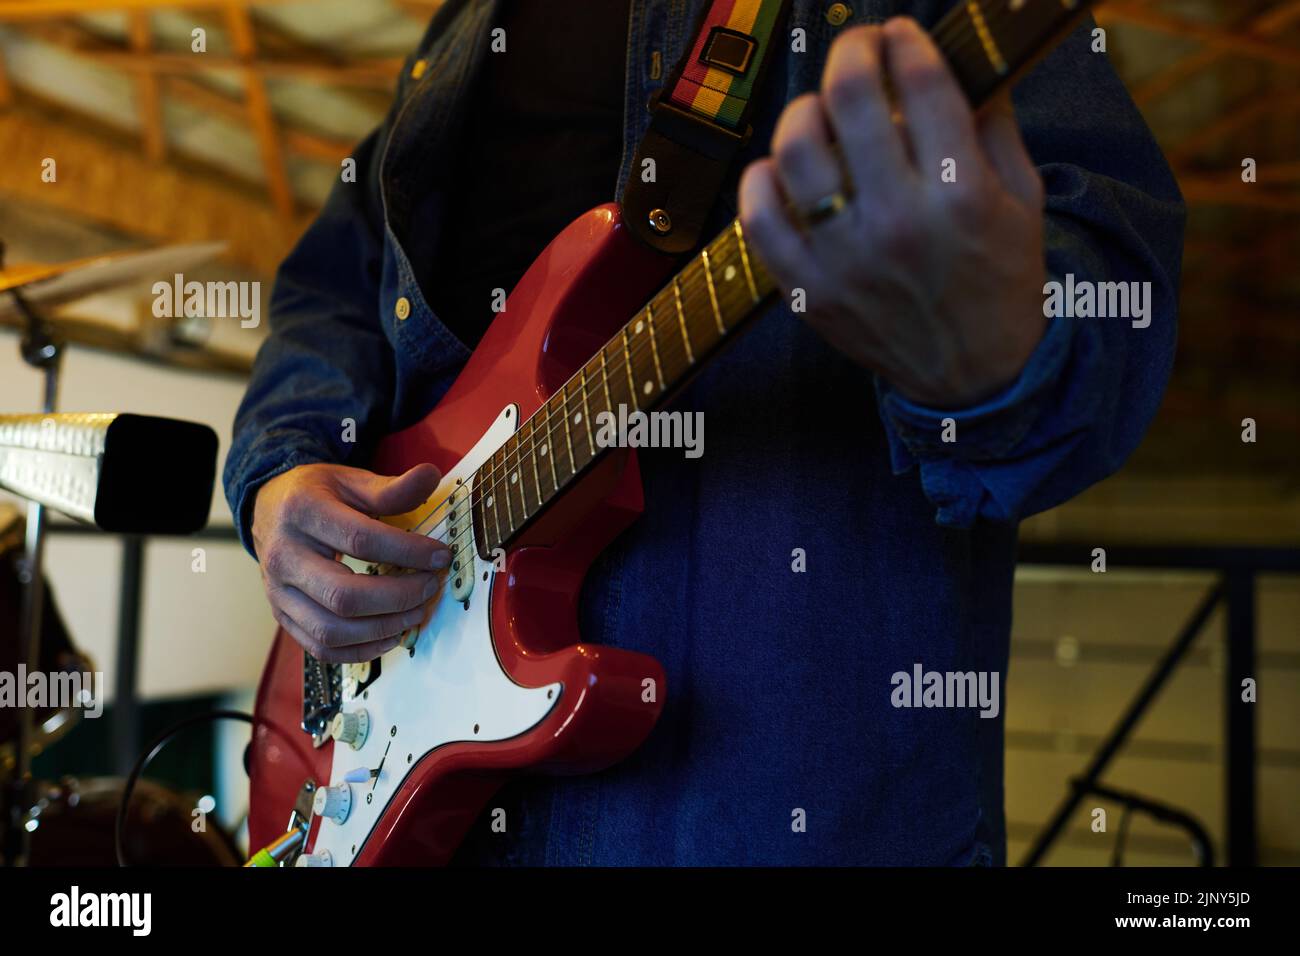 Close-up of young male musician in blue denim jacket plucking strings while playing electric guitar during music repetition in garage Stock Photo